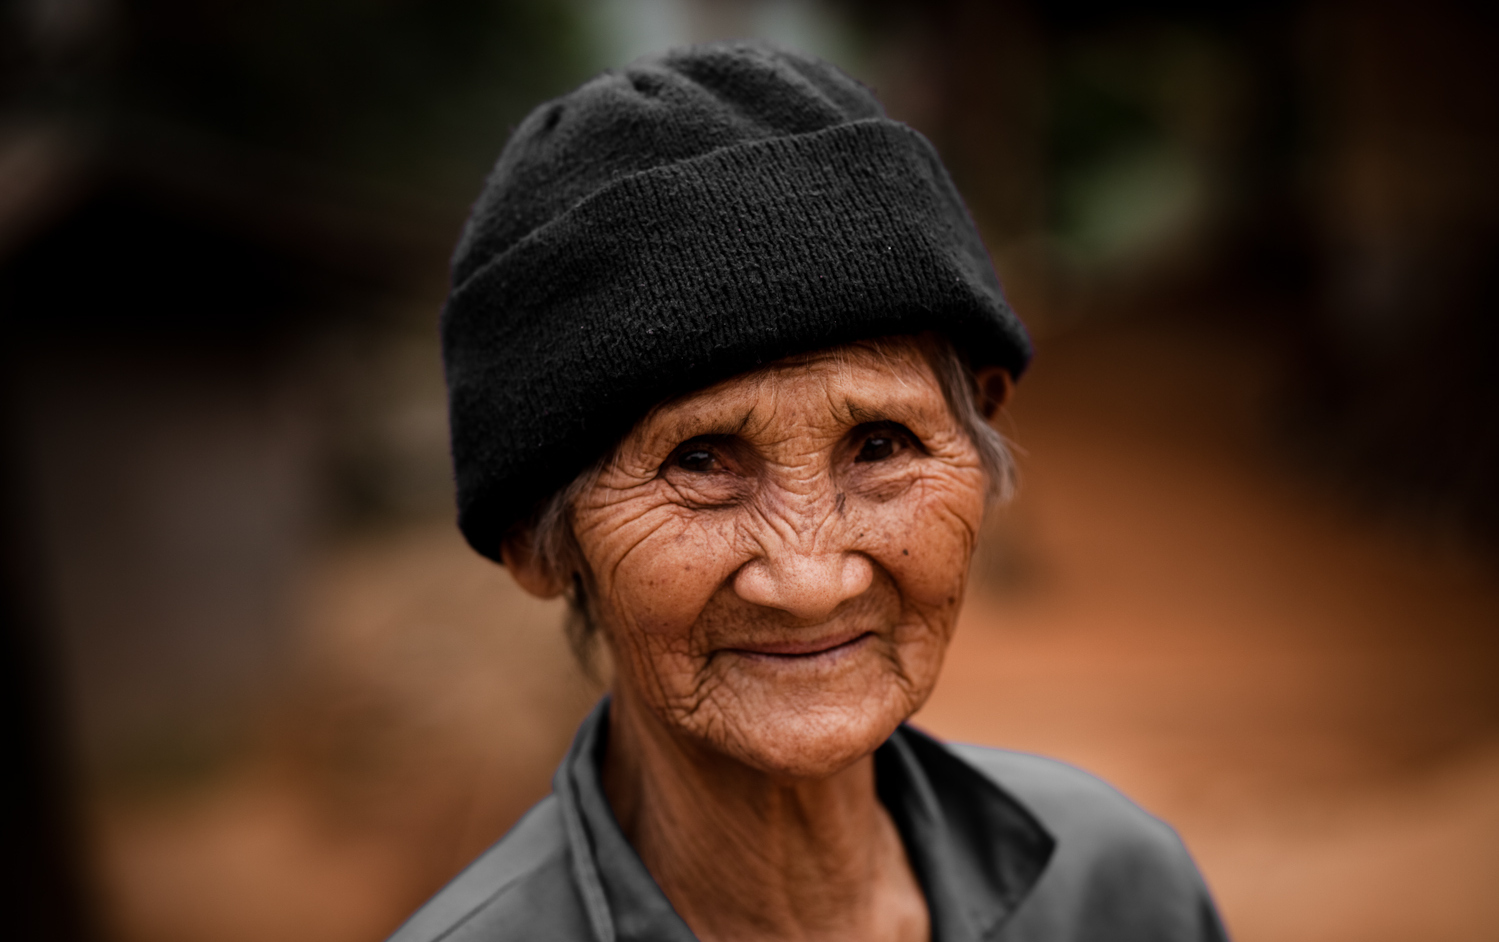 old_woman_by_Eric_Montfort